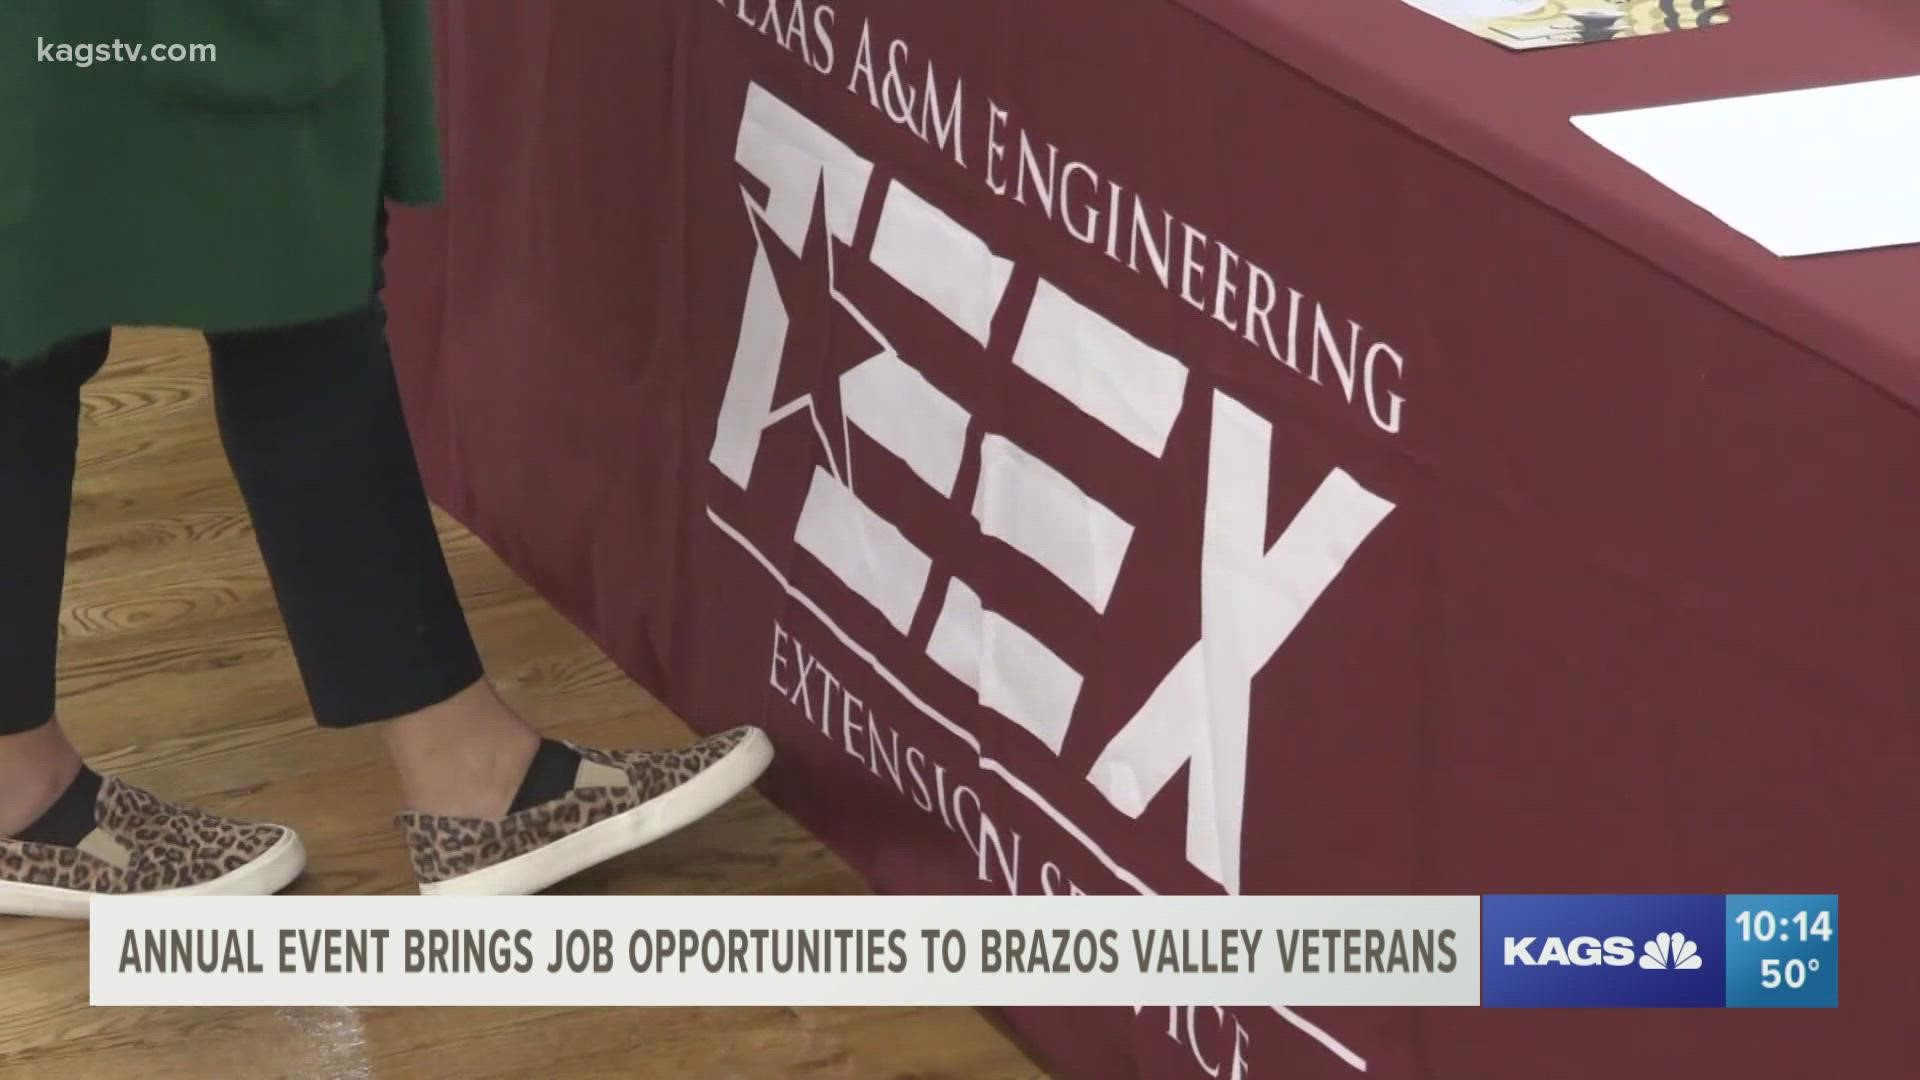 Almost 70 employers filled the Brazos Center Thursday morning with hopes to provide jobs to veterans and non-veterans.